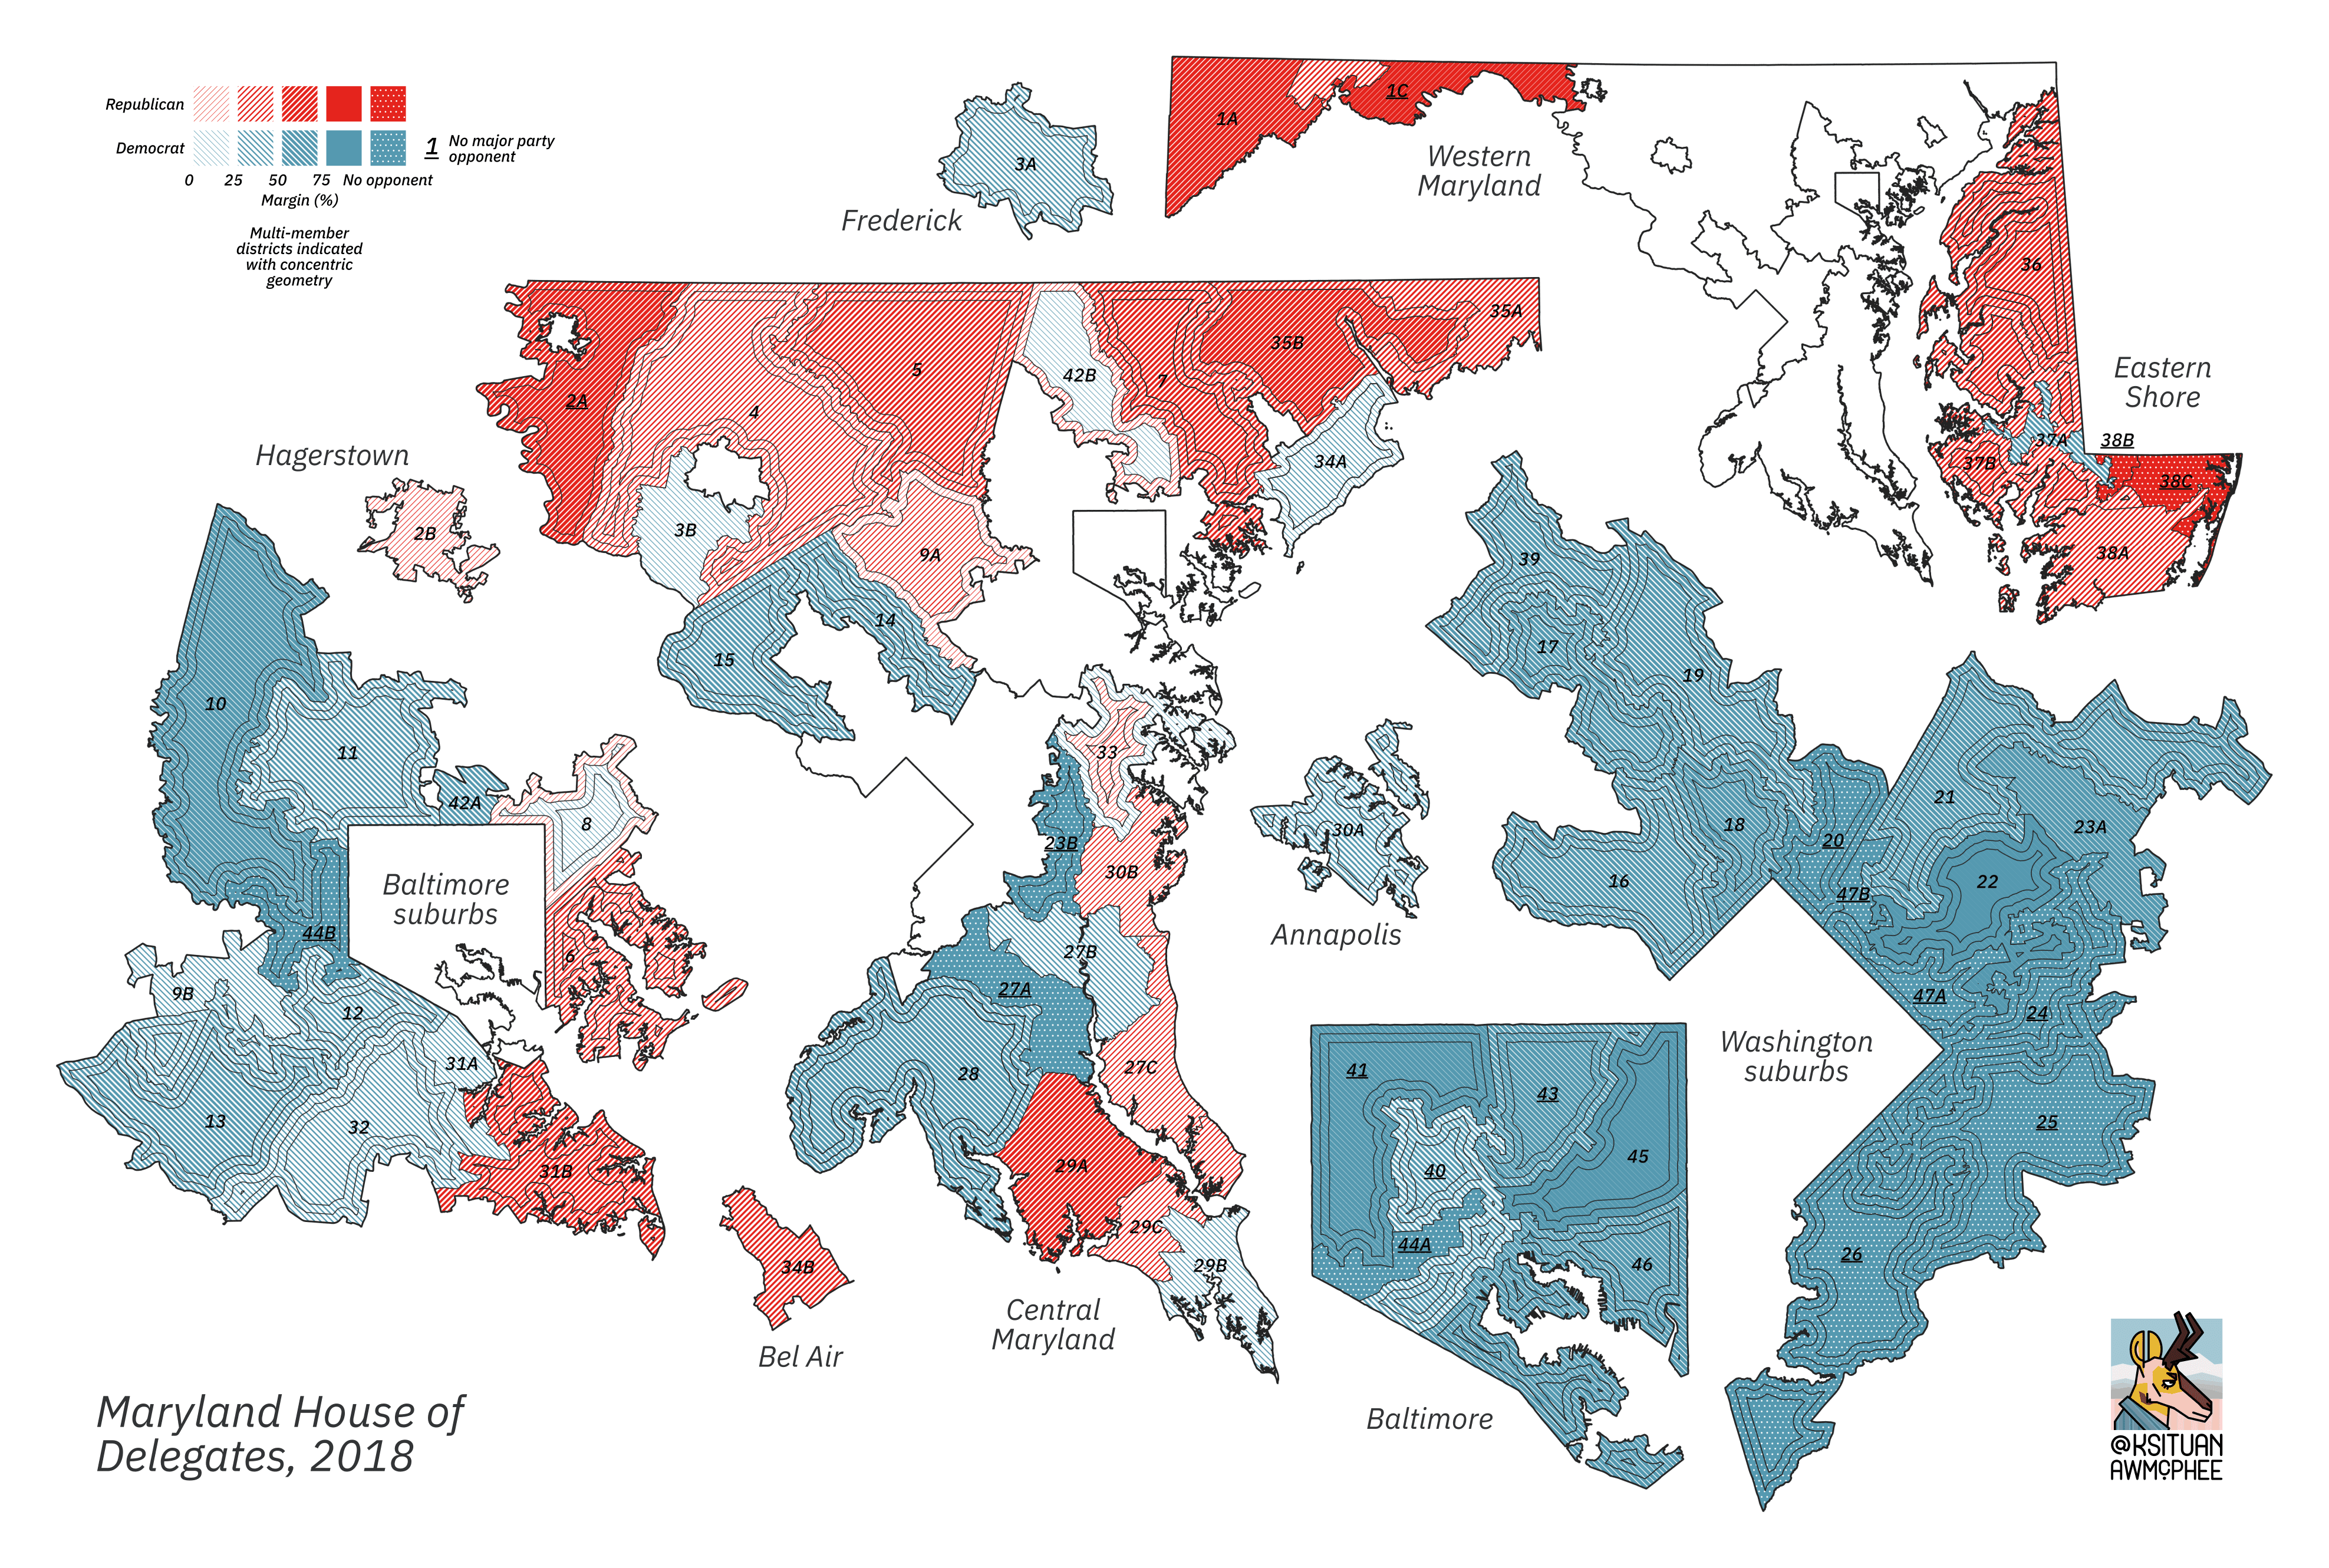 A political map of Maryland.